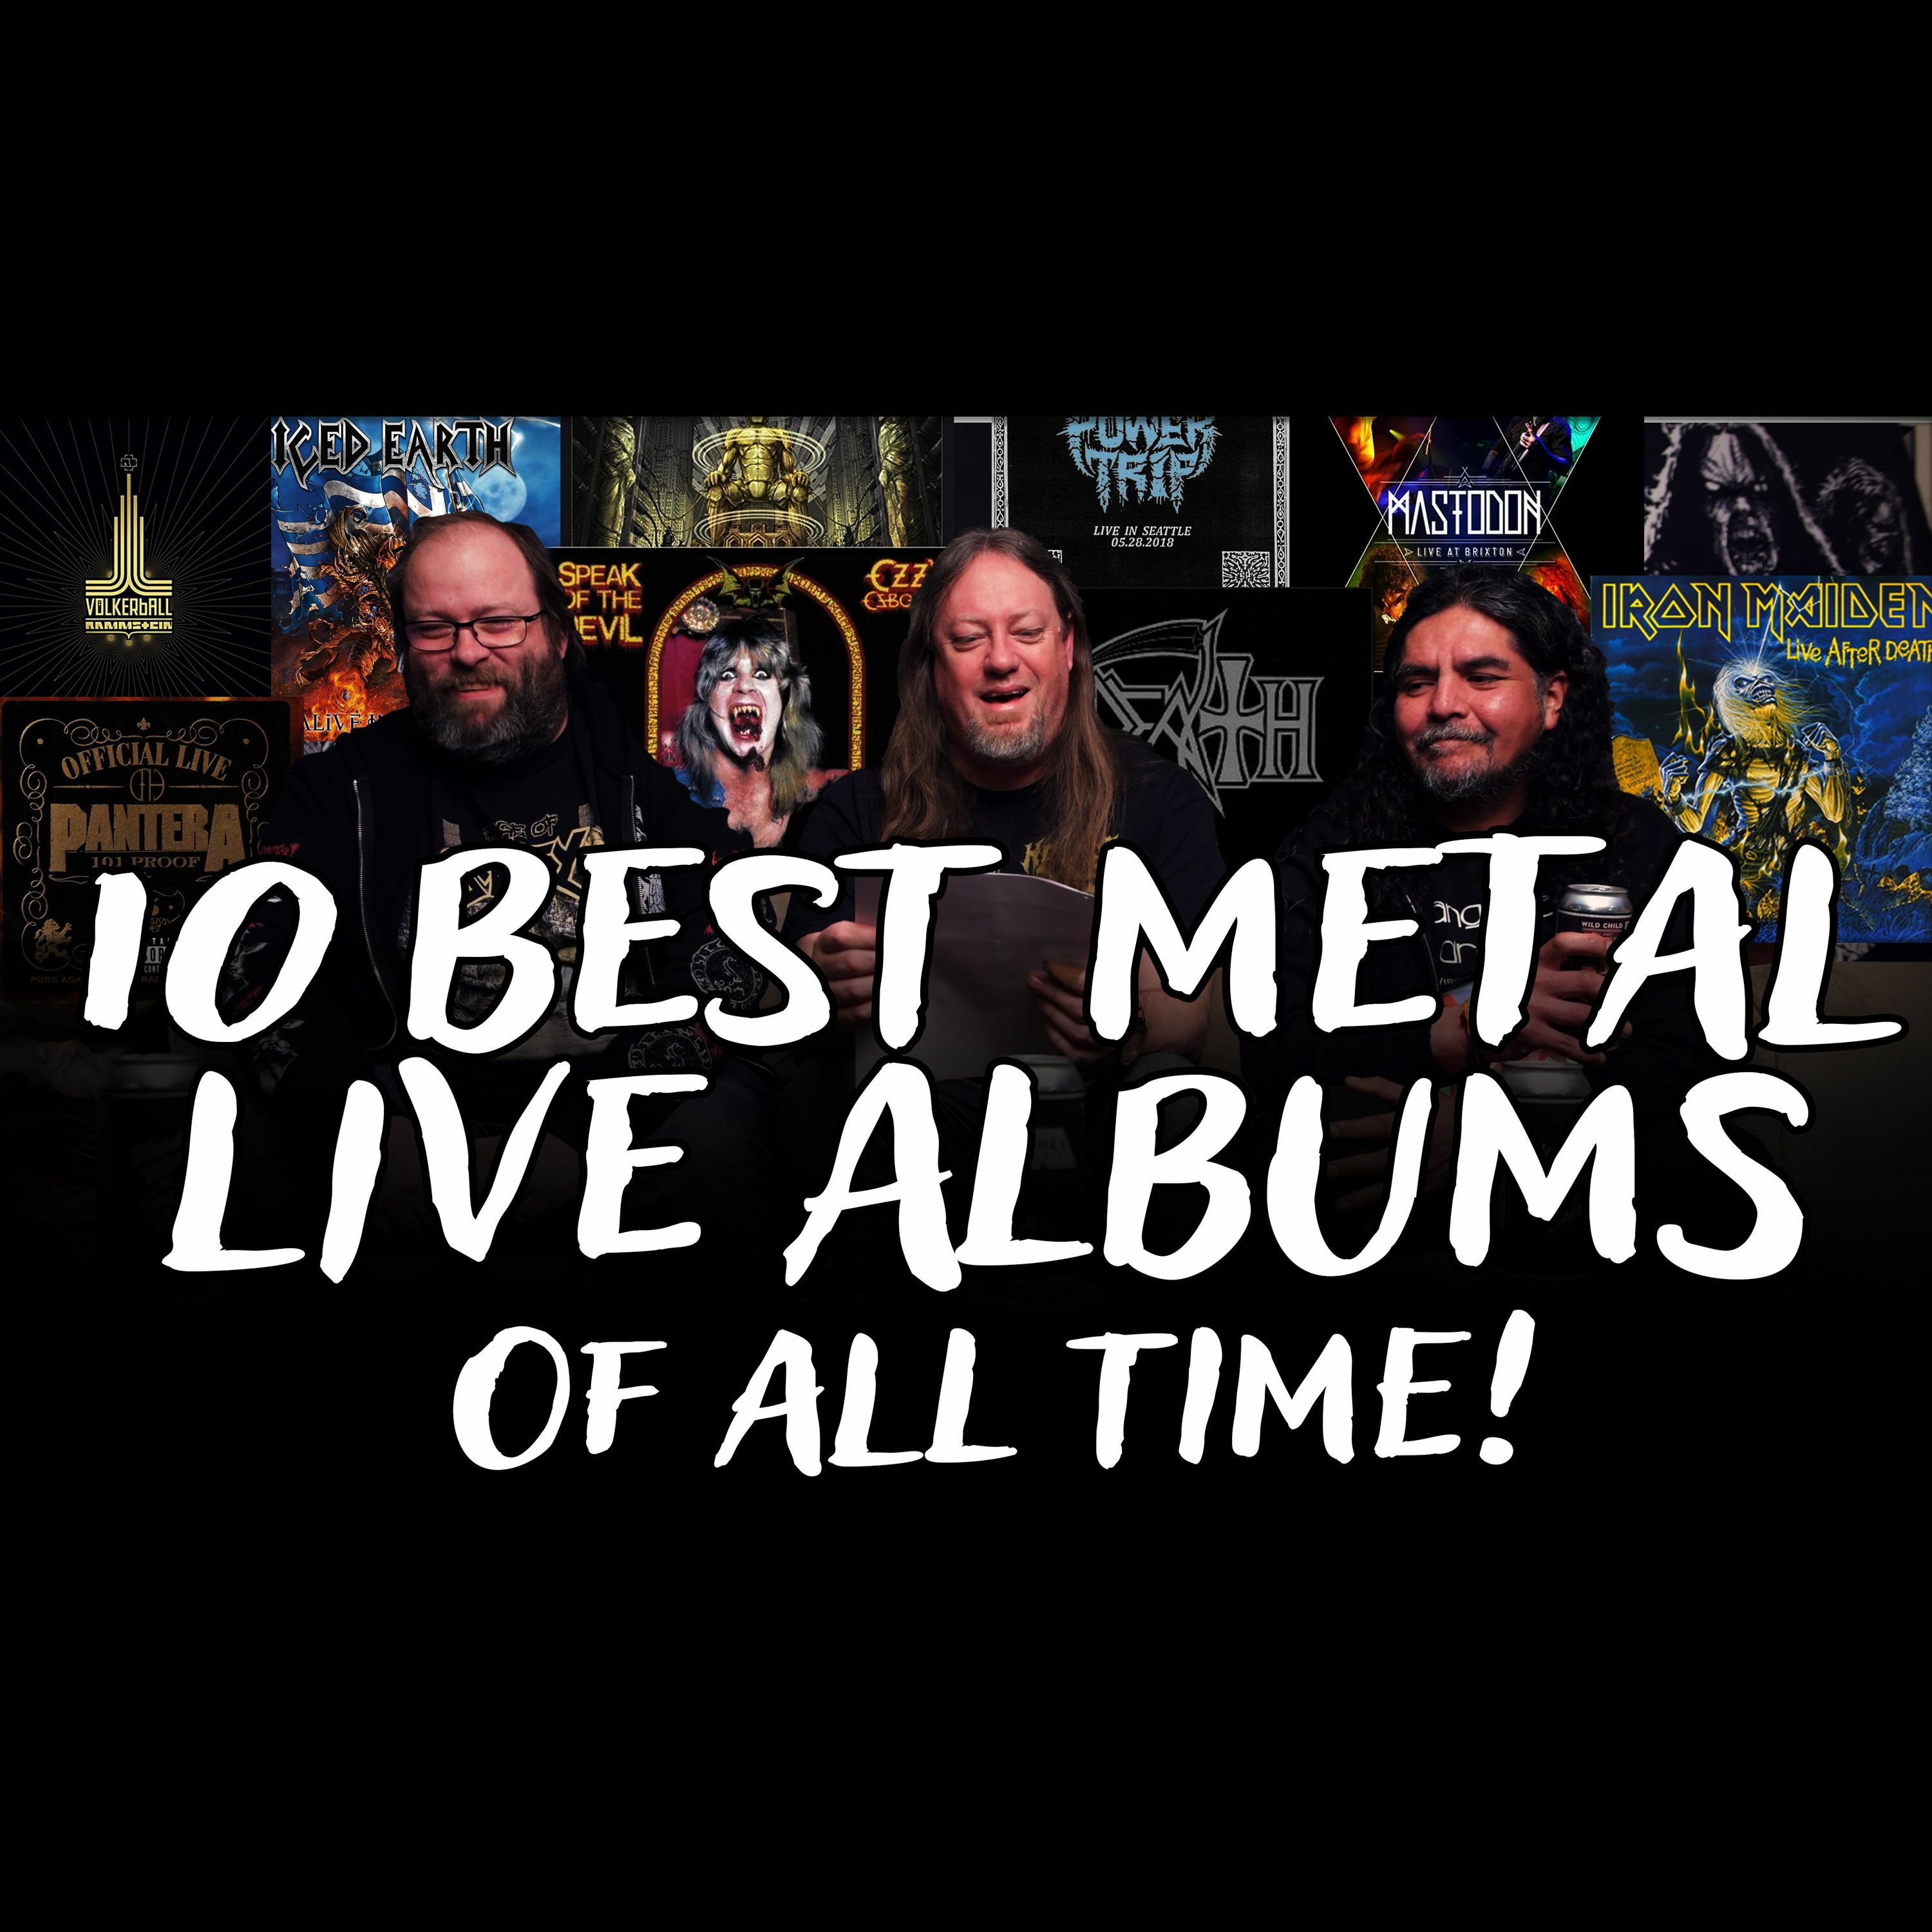 10 Best Metal Live Albums of All Time